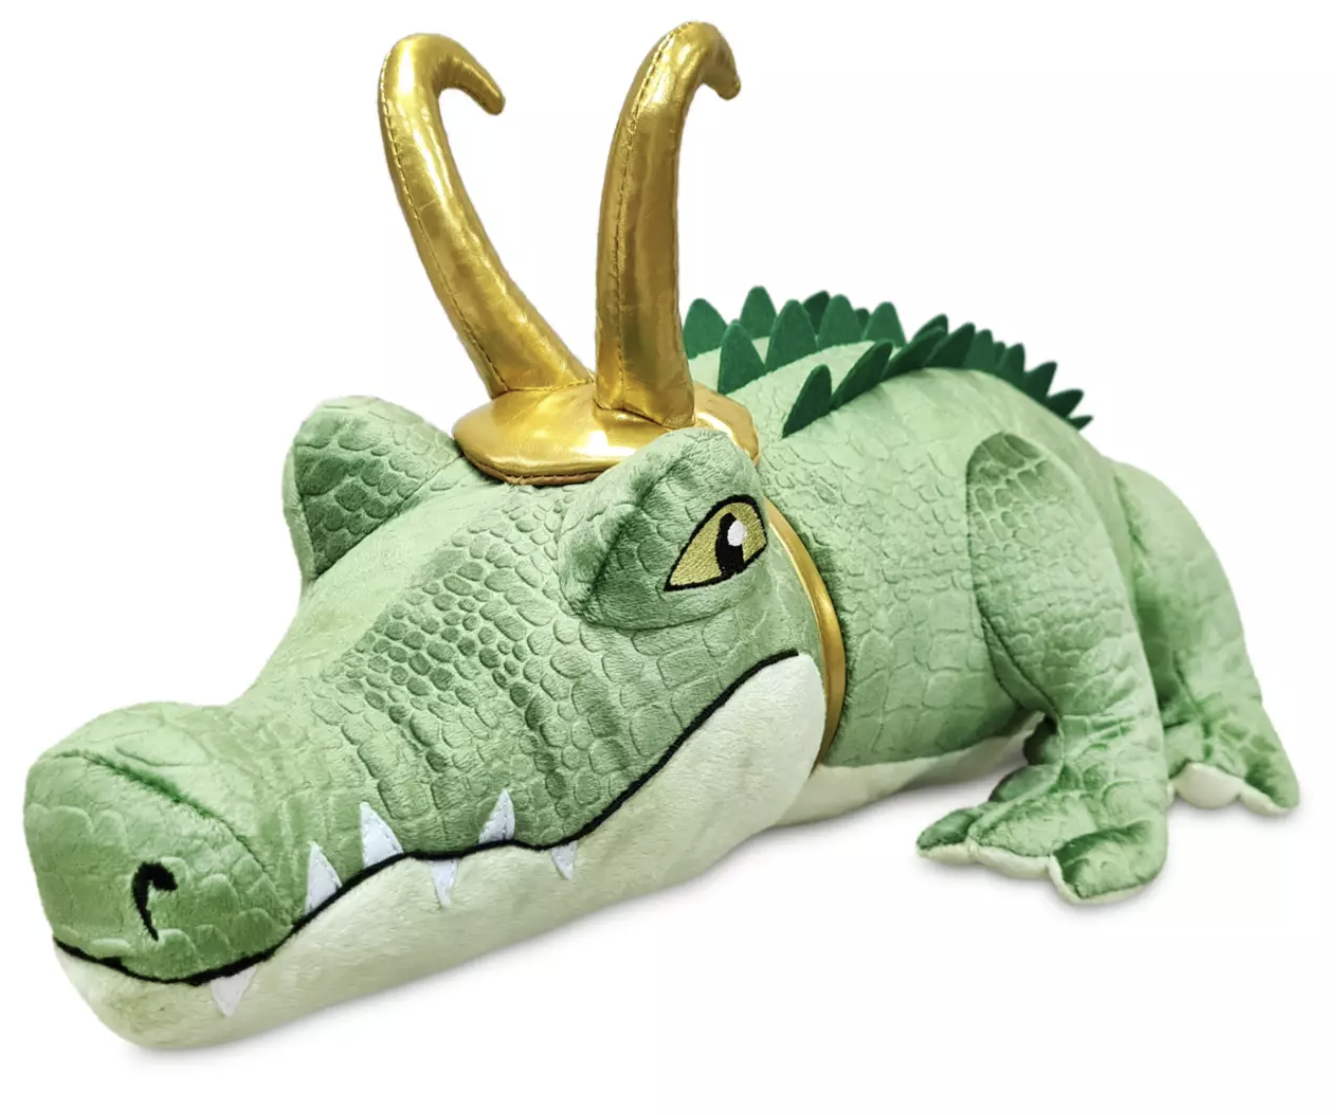 A LOKI ALLIGATOR Plush Now Exists...But It'll Cost You - AllEars.Net